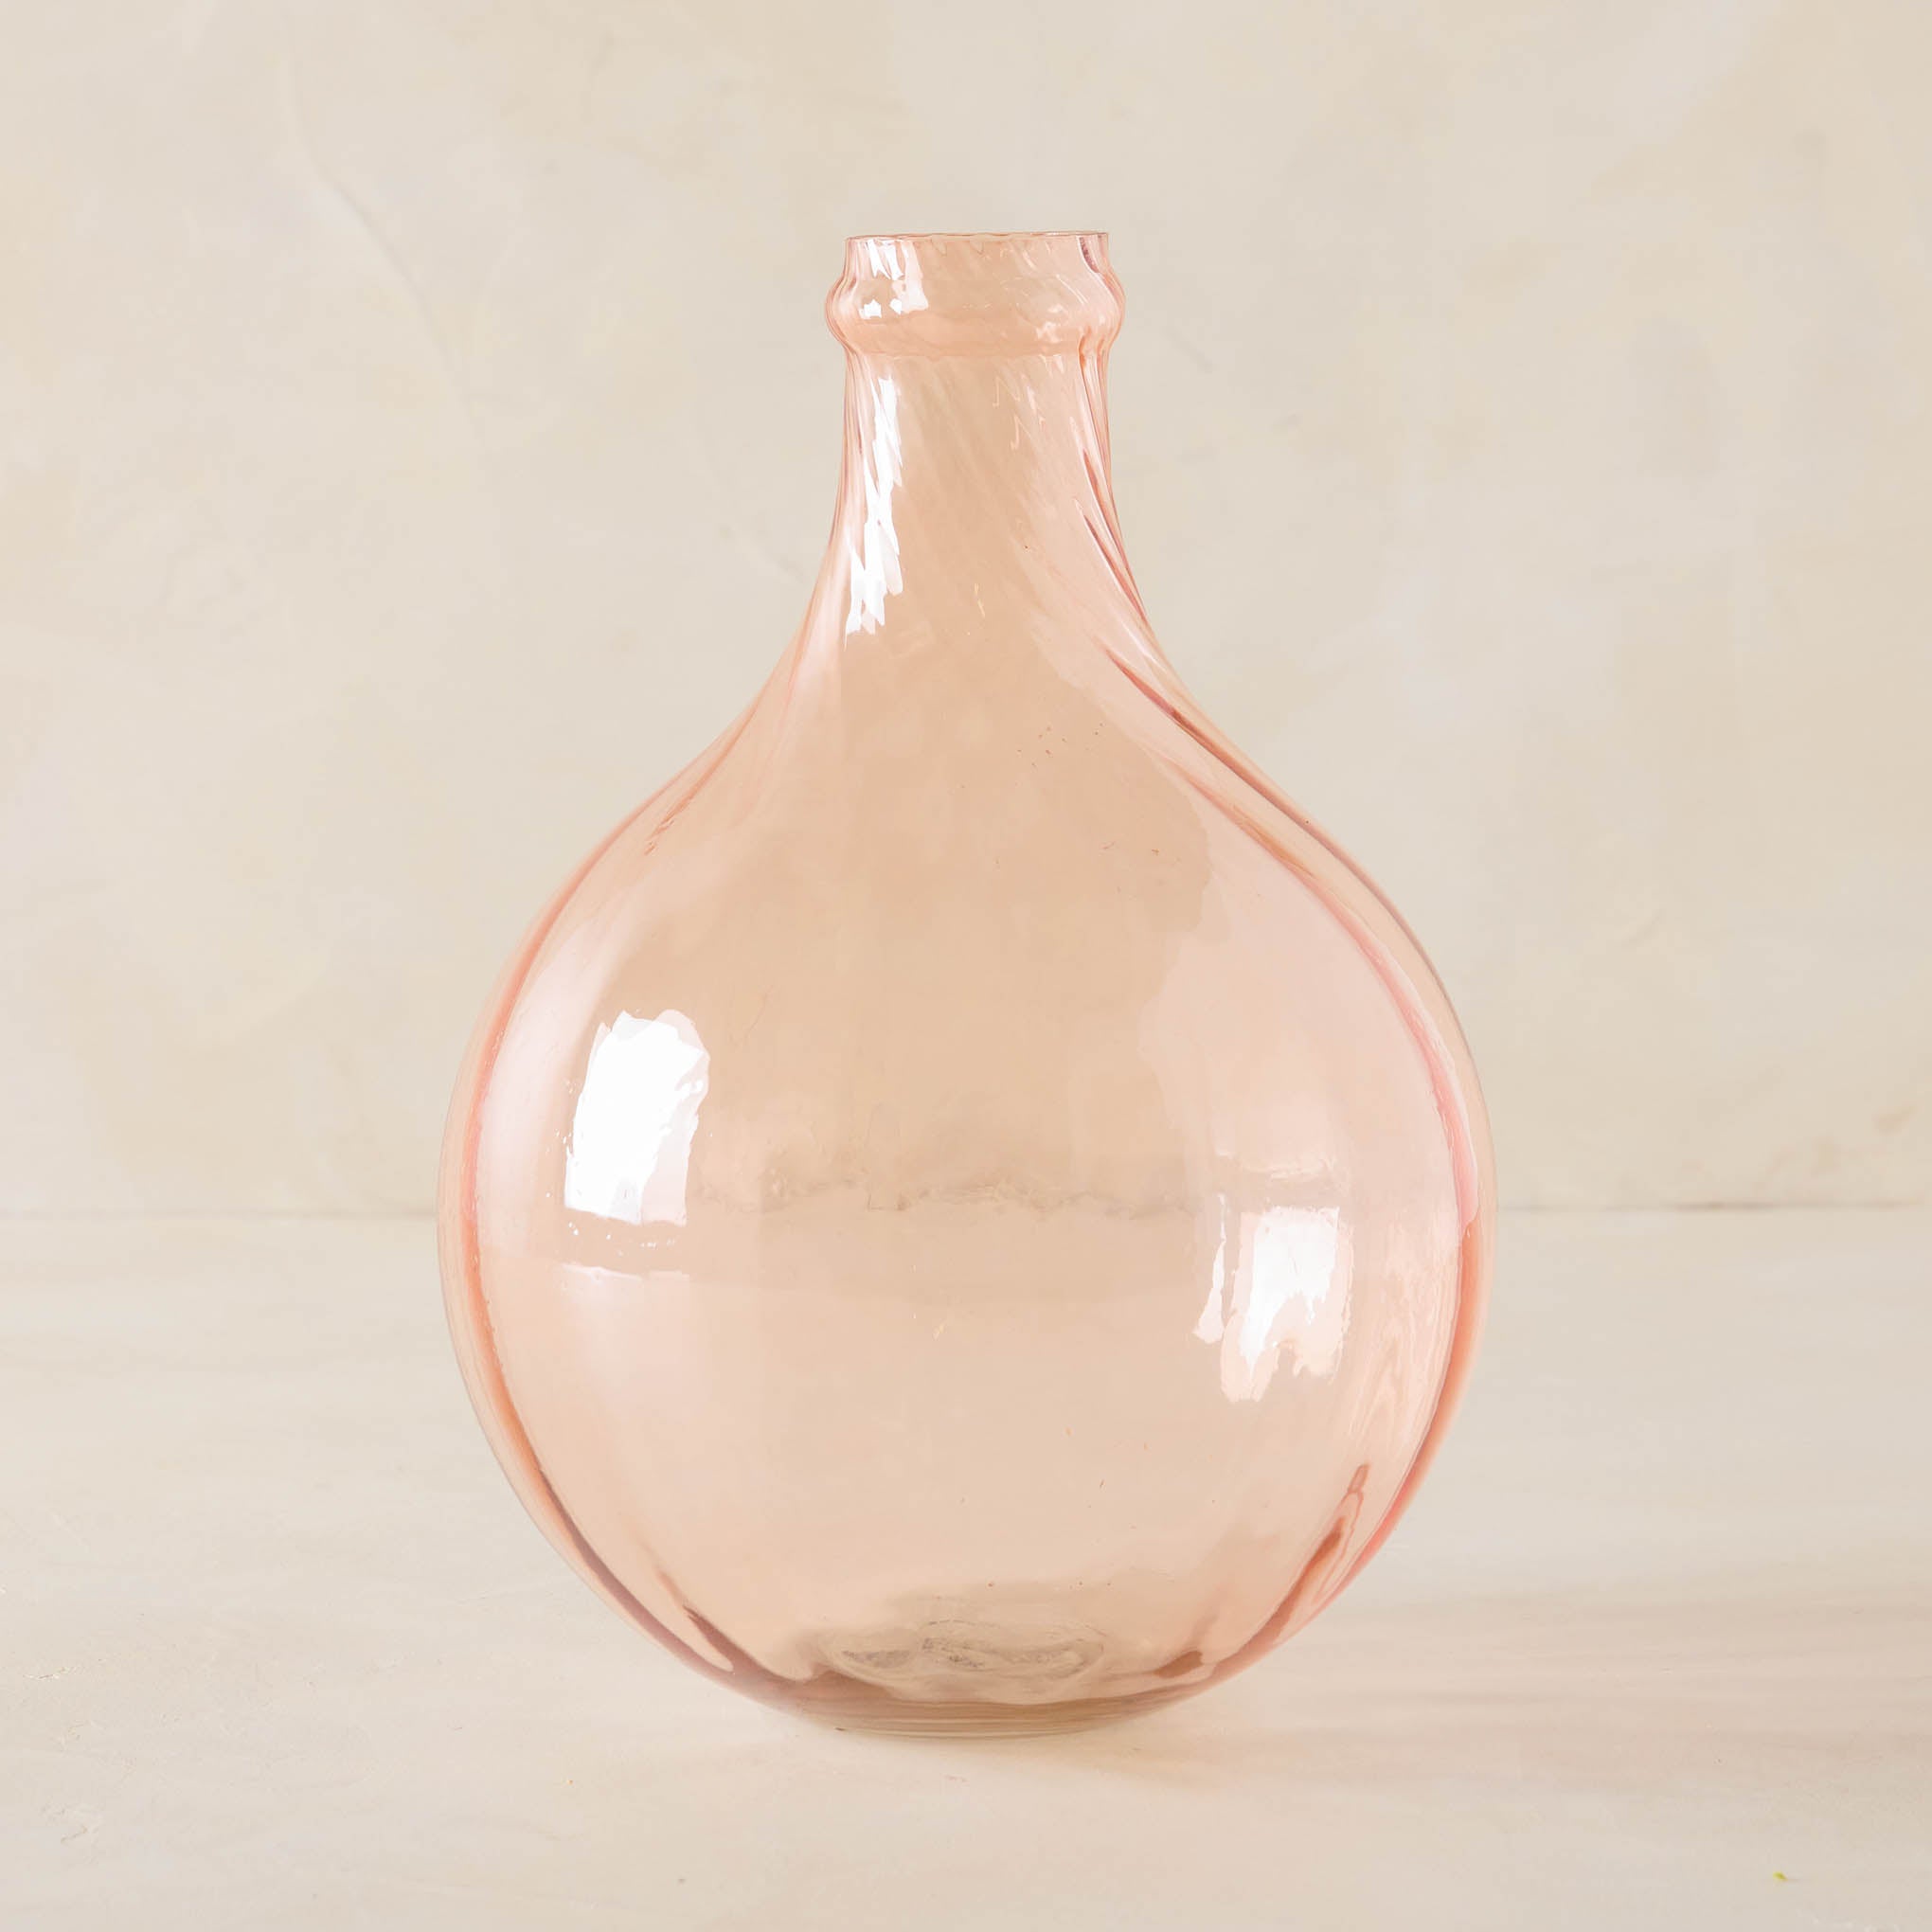 Penelope Fluted glass vase in peach On sale for $19.20, discounted from $32.00